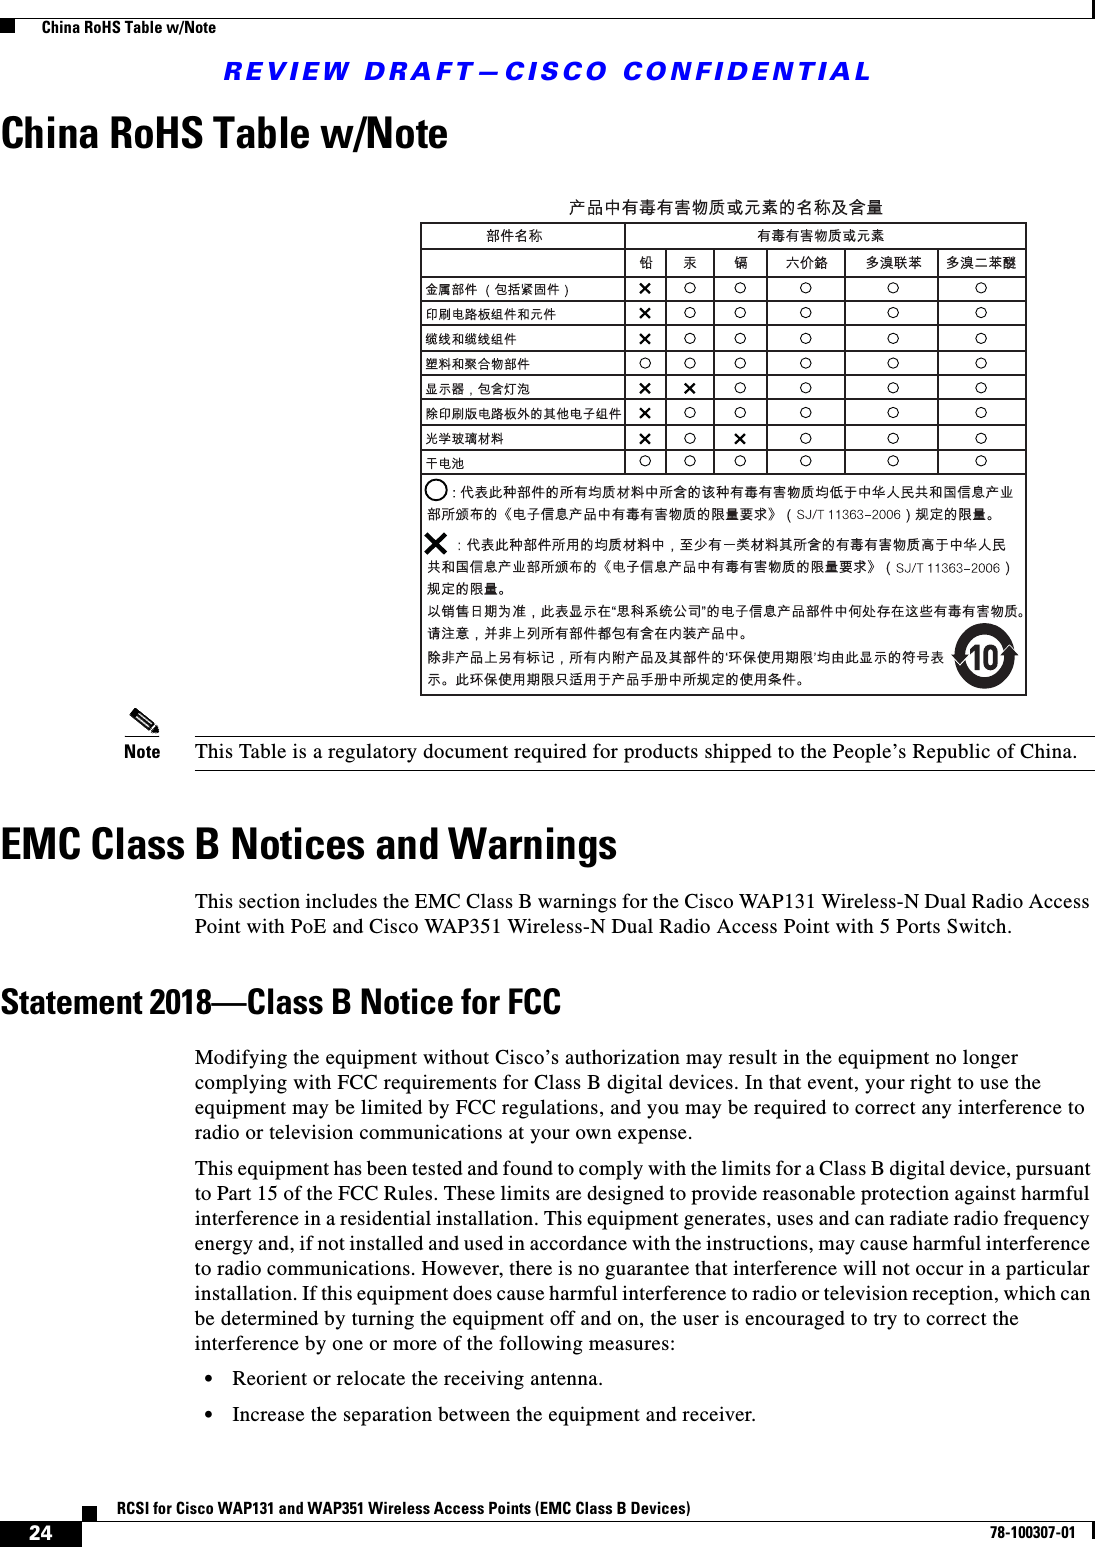 REVIEW DRAFT—CISCO CONFIDENTIAL24RCSI for Cisco WAP131 and WAP351 Wireless Access Points (EMC Class B Devices)78-100307-01  China RoHS Table w/NoteChina RoHS Table w/NoteNote This Table is a regulatory document required for products shipped to the People’s Republic of China.EMC Class B Notices and WarningsThis section includes the EMC Class B warnings for the Cisco WAP131 Wireless-N Dual Radio Access Point with PoE and Cisco WAP351 Wireless-N Dual Radio Access Point with 5 Ports Switch.Statement 2018—Class B Notice for FCCModifying the equipment without Cisco’s authorization may result in the equipment no longer complying with FCC requirements for Class B digital devices. In that event, your right to use the equipment may be limited by FCC regulations, and you may be required to correct any interference to radio or television communications at your own expense.This equipment has been tested and found to comply with the limits for a Class B digital device, pursuant to Part 15 of the FCC Rules. These limits are designed to provide reasonable protection against harmful interference in a residential installation. This equipment generates, uses and can radiate radio frequency energy and, if not installed and used in accordance with the instructions, may cause harmful interference to radio communications. However, there is no guarantee that interference will not occur in a particular installation. If this equipment does cause harmful interference to radio or television reception, which can be determined by turning the equipment off and on, the user is encouraged to try to correct the interference by one or more of the following measures: •Reorient or relocate the receiving antenna. •Increase the separation between the equipment and receiver.